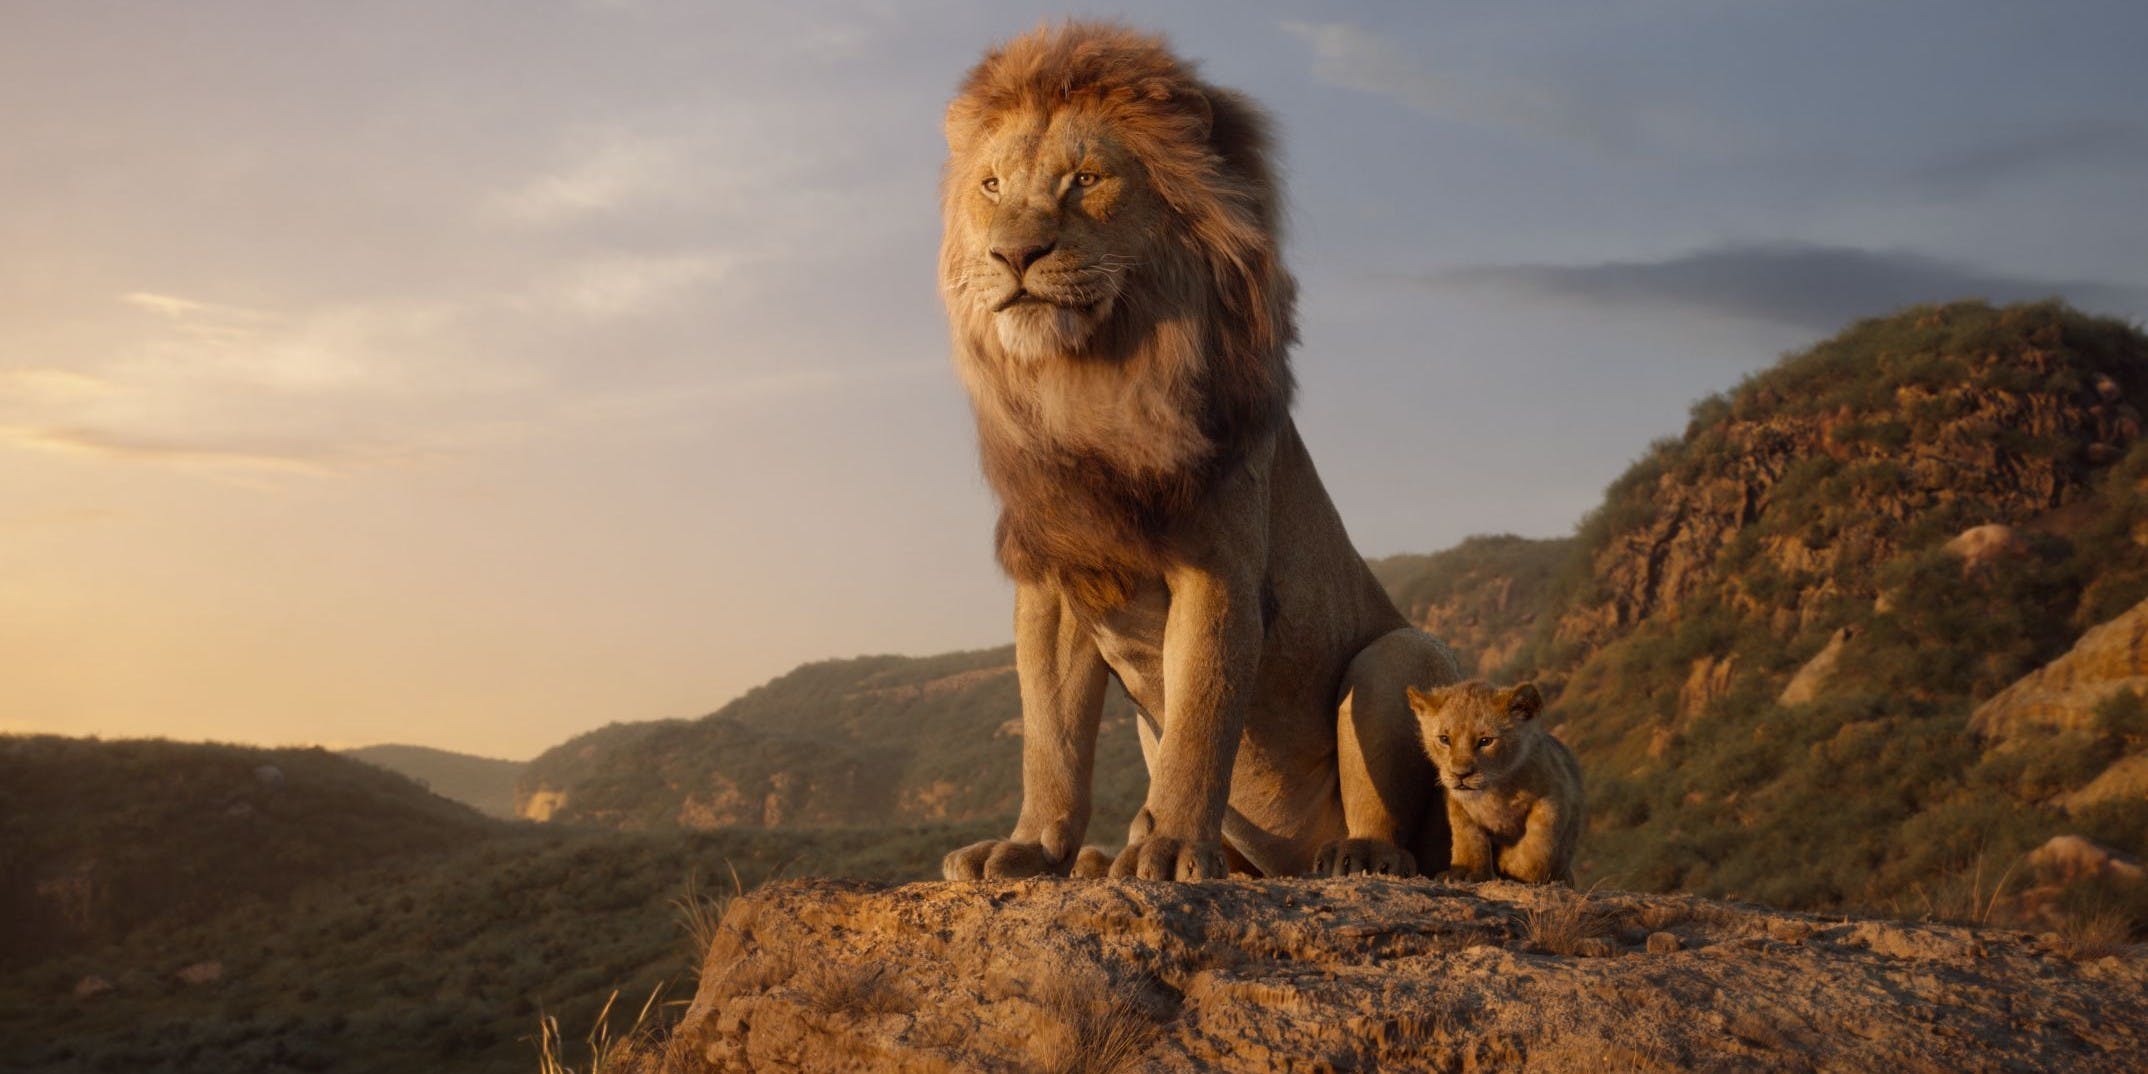 The Lion King (2019) review: An overall satisfying remake